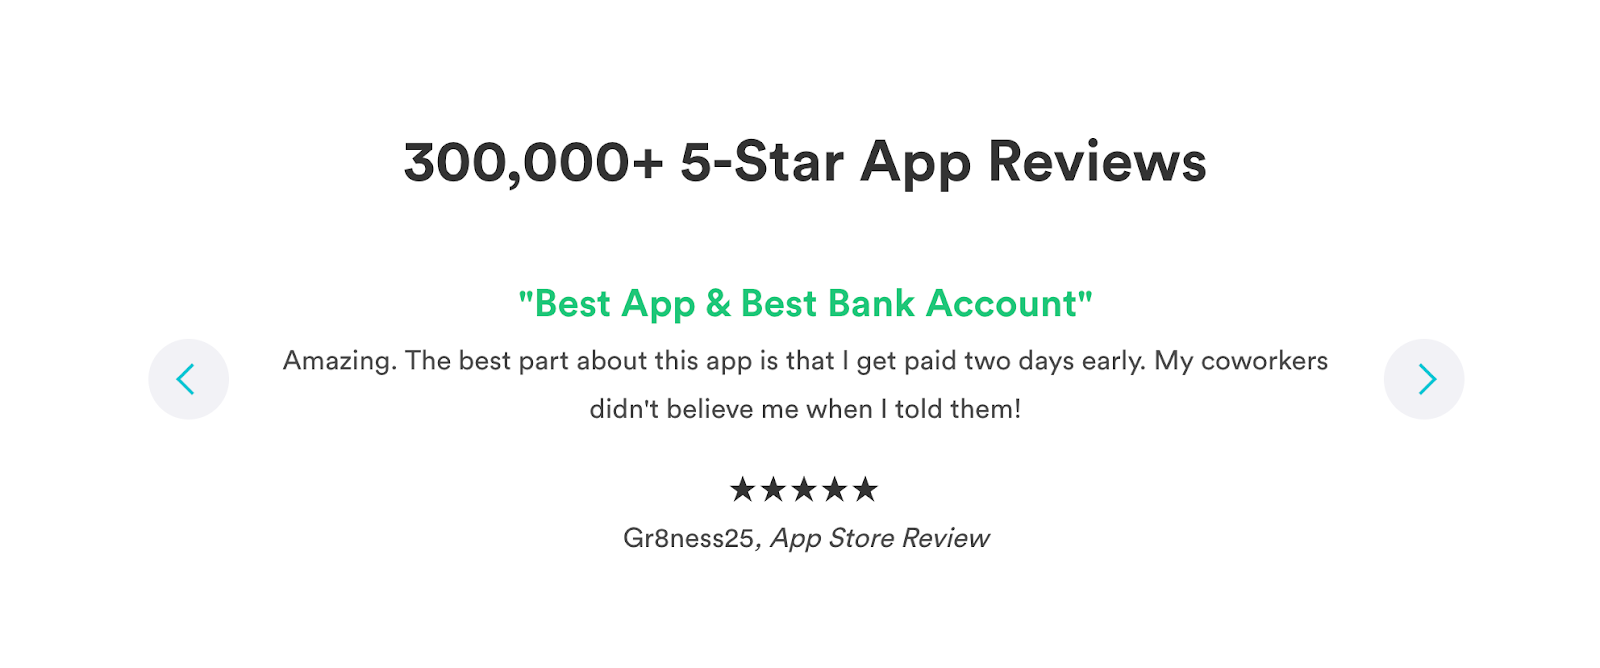 Example of Social Proof: Chime App review. Source: https://www.chime.com/applyggspotme-2/